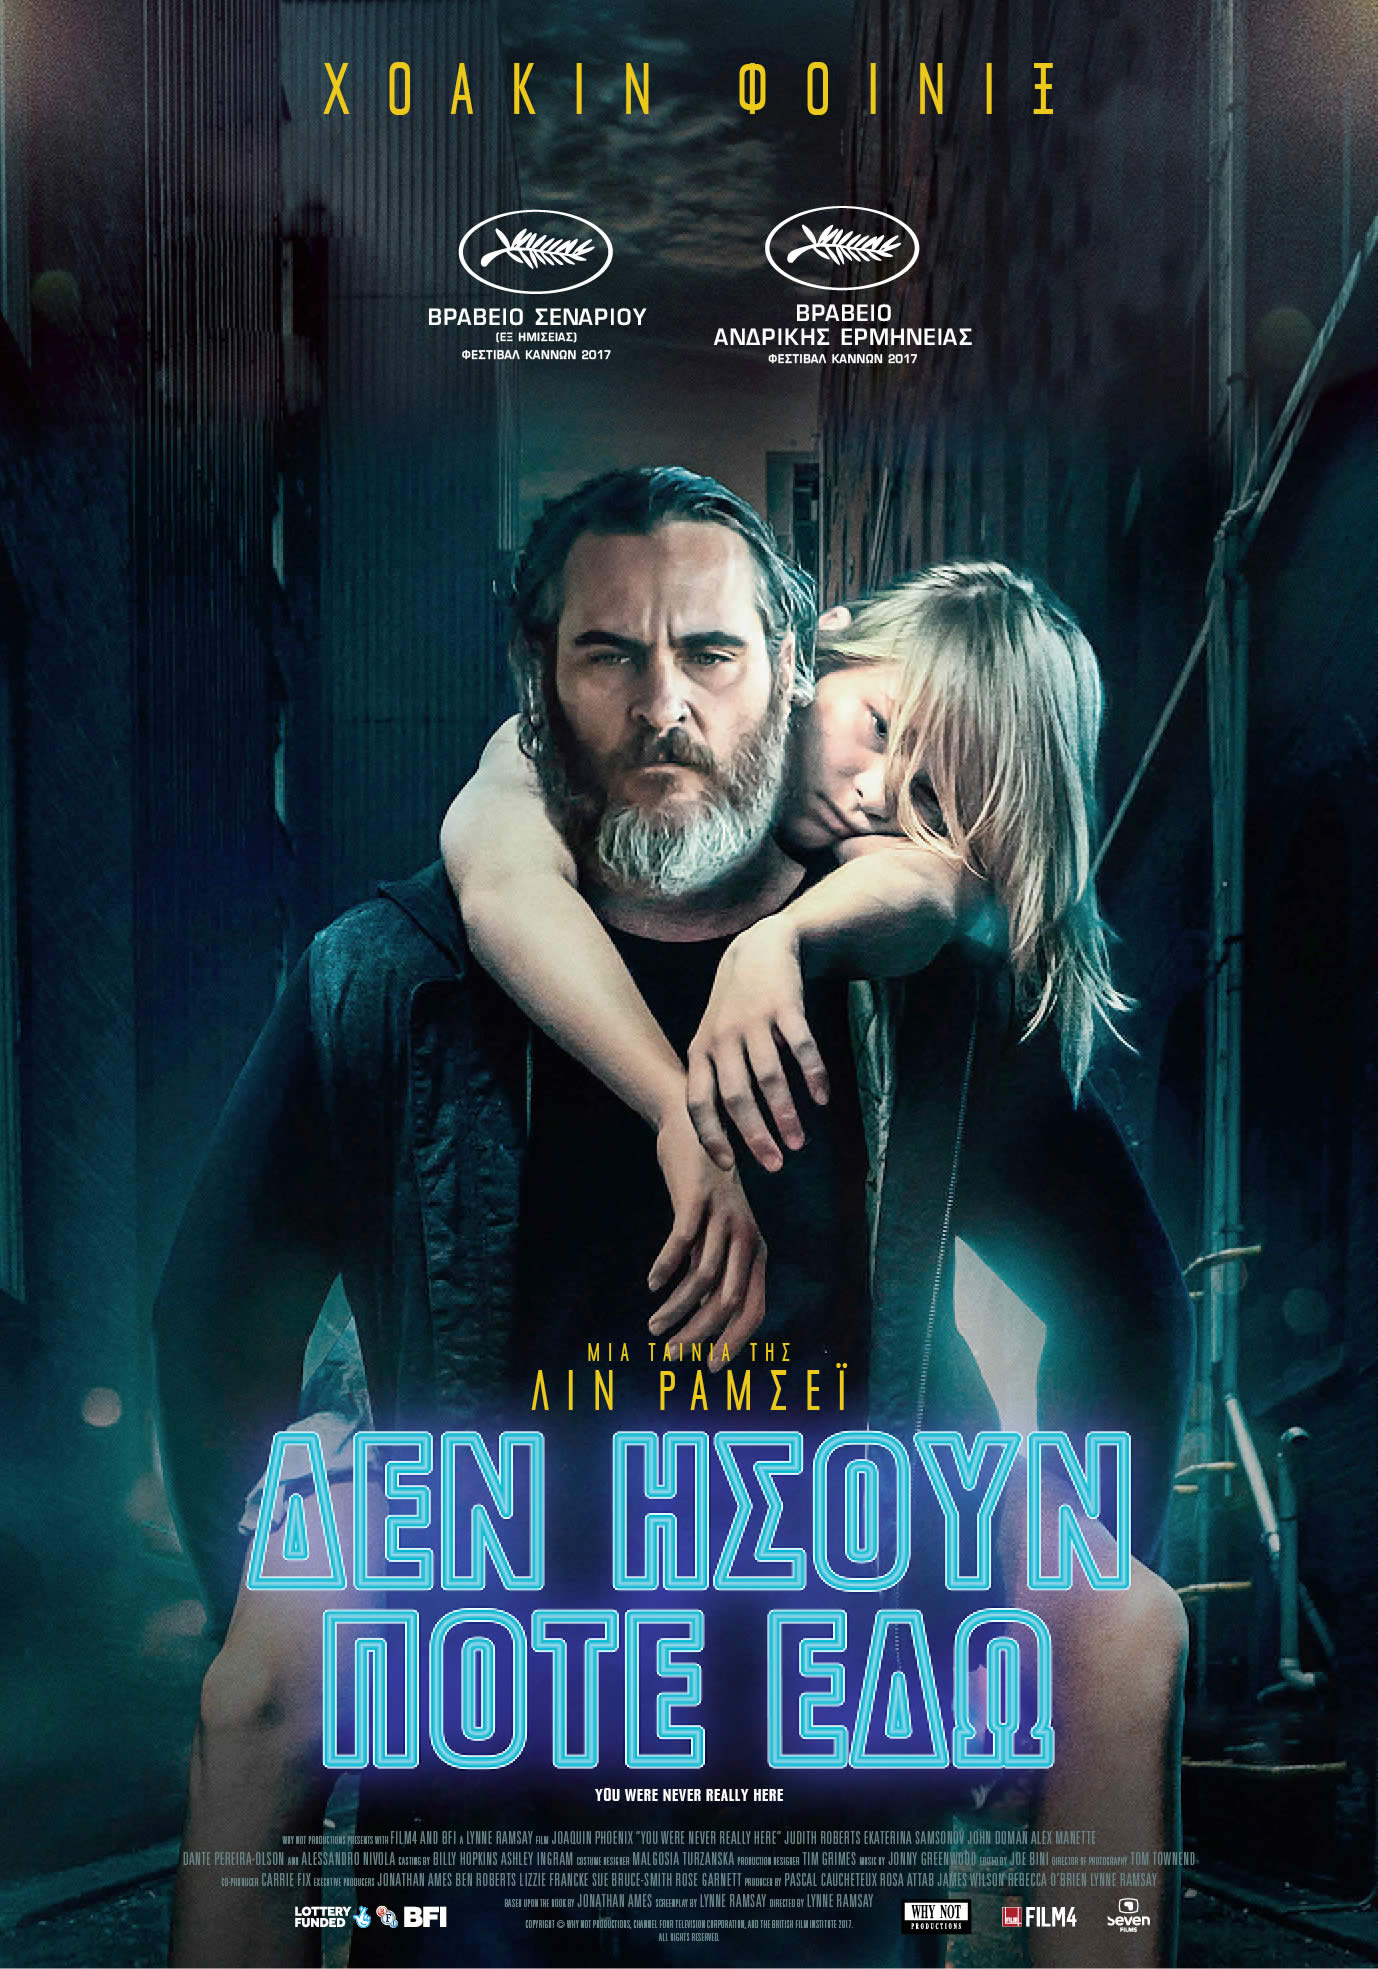 You Were Never Really Here 00